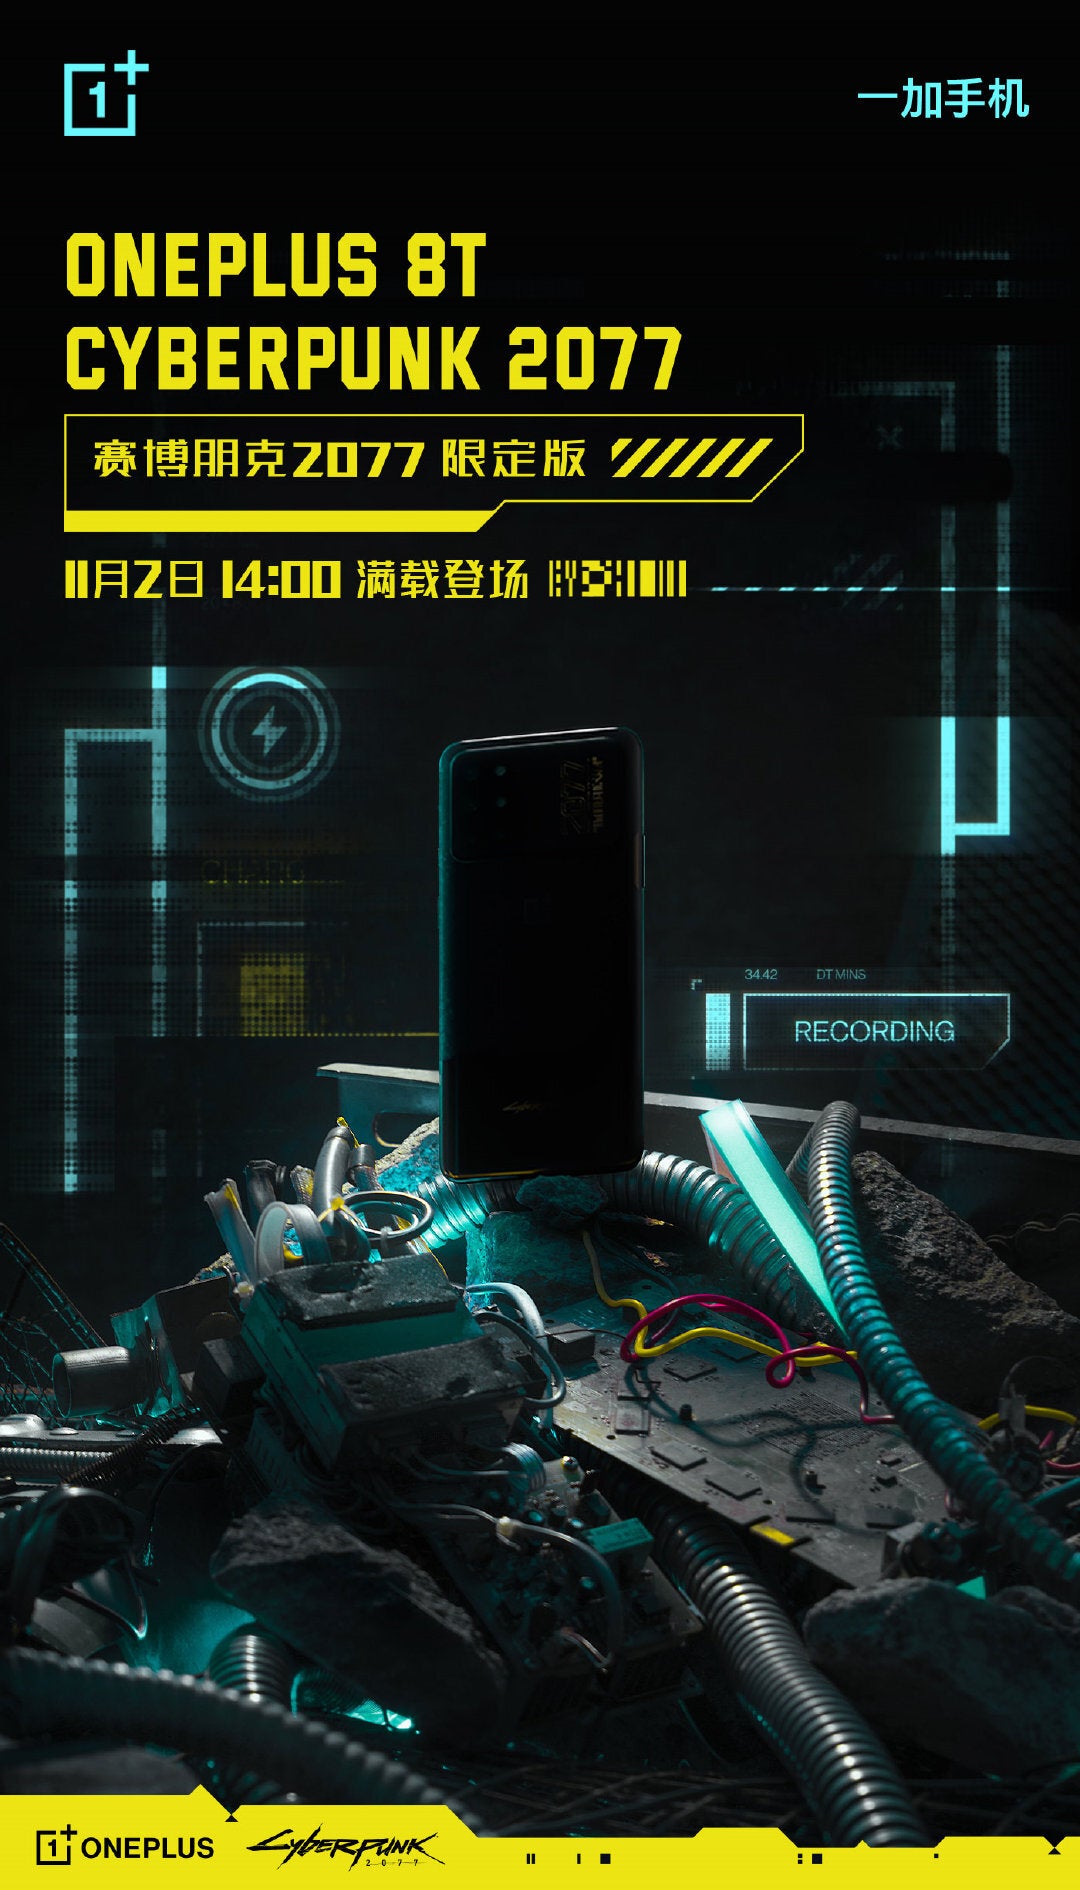 OnePlus 8T Cyberpunk 2077 Edition launch date has been revealed